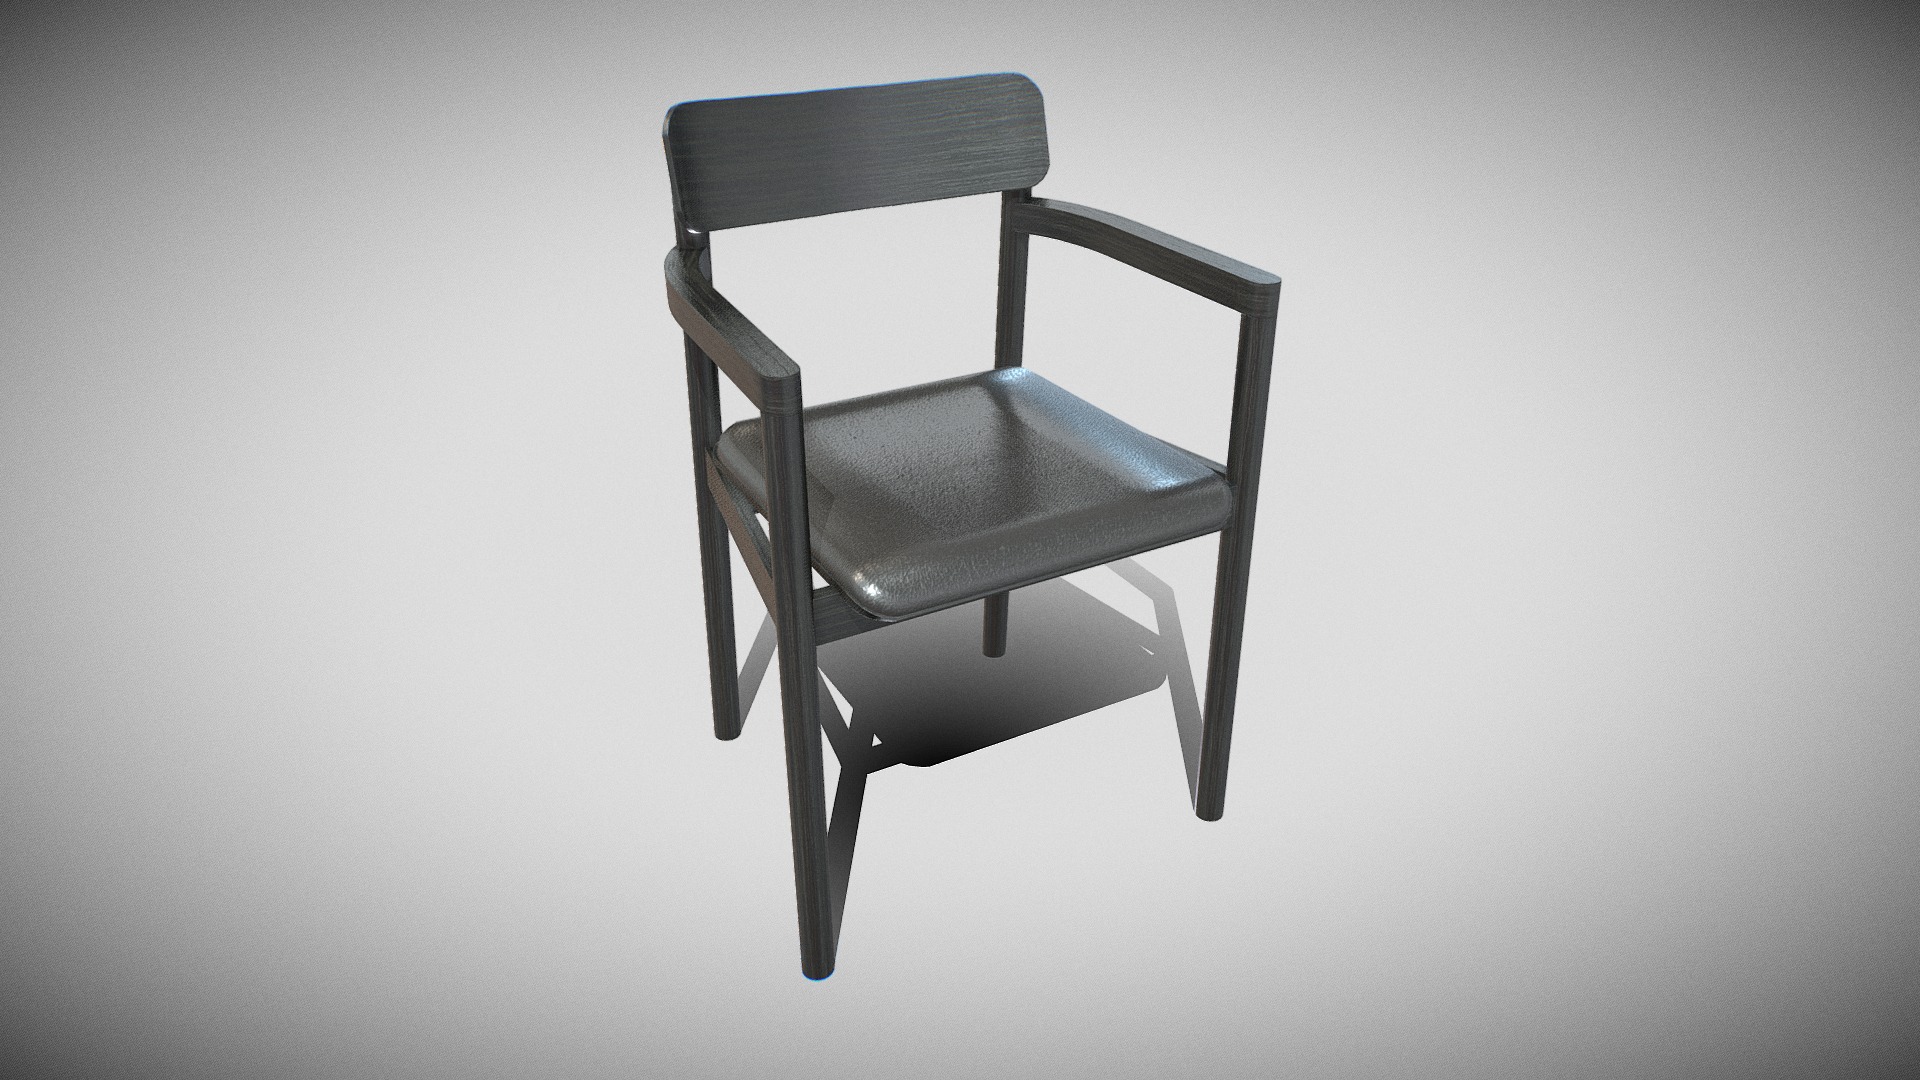 3D model POST Chair-3346-black ash wood and leather - This is a 3D model of the POST Chair-3346-black ash wood and leather. The 3D model is about a chair against a wall.